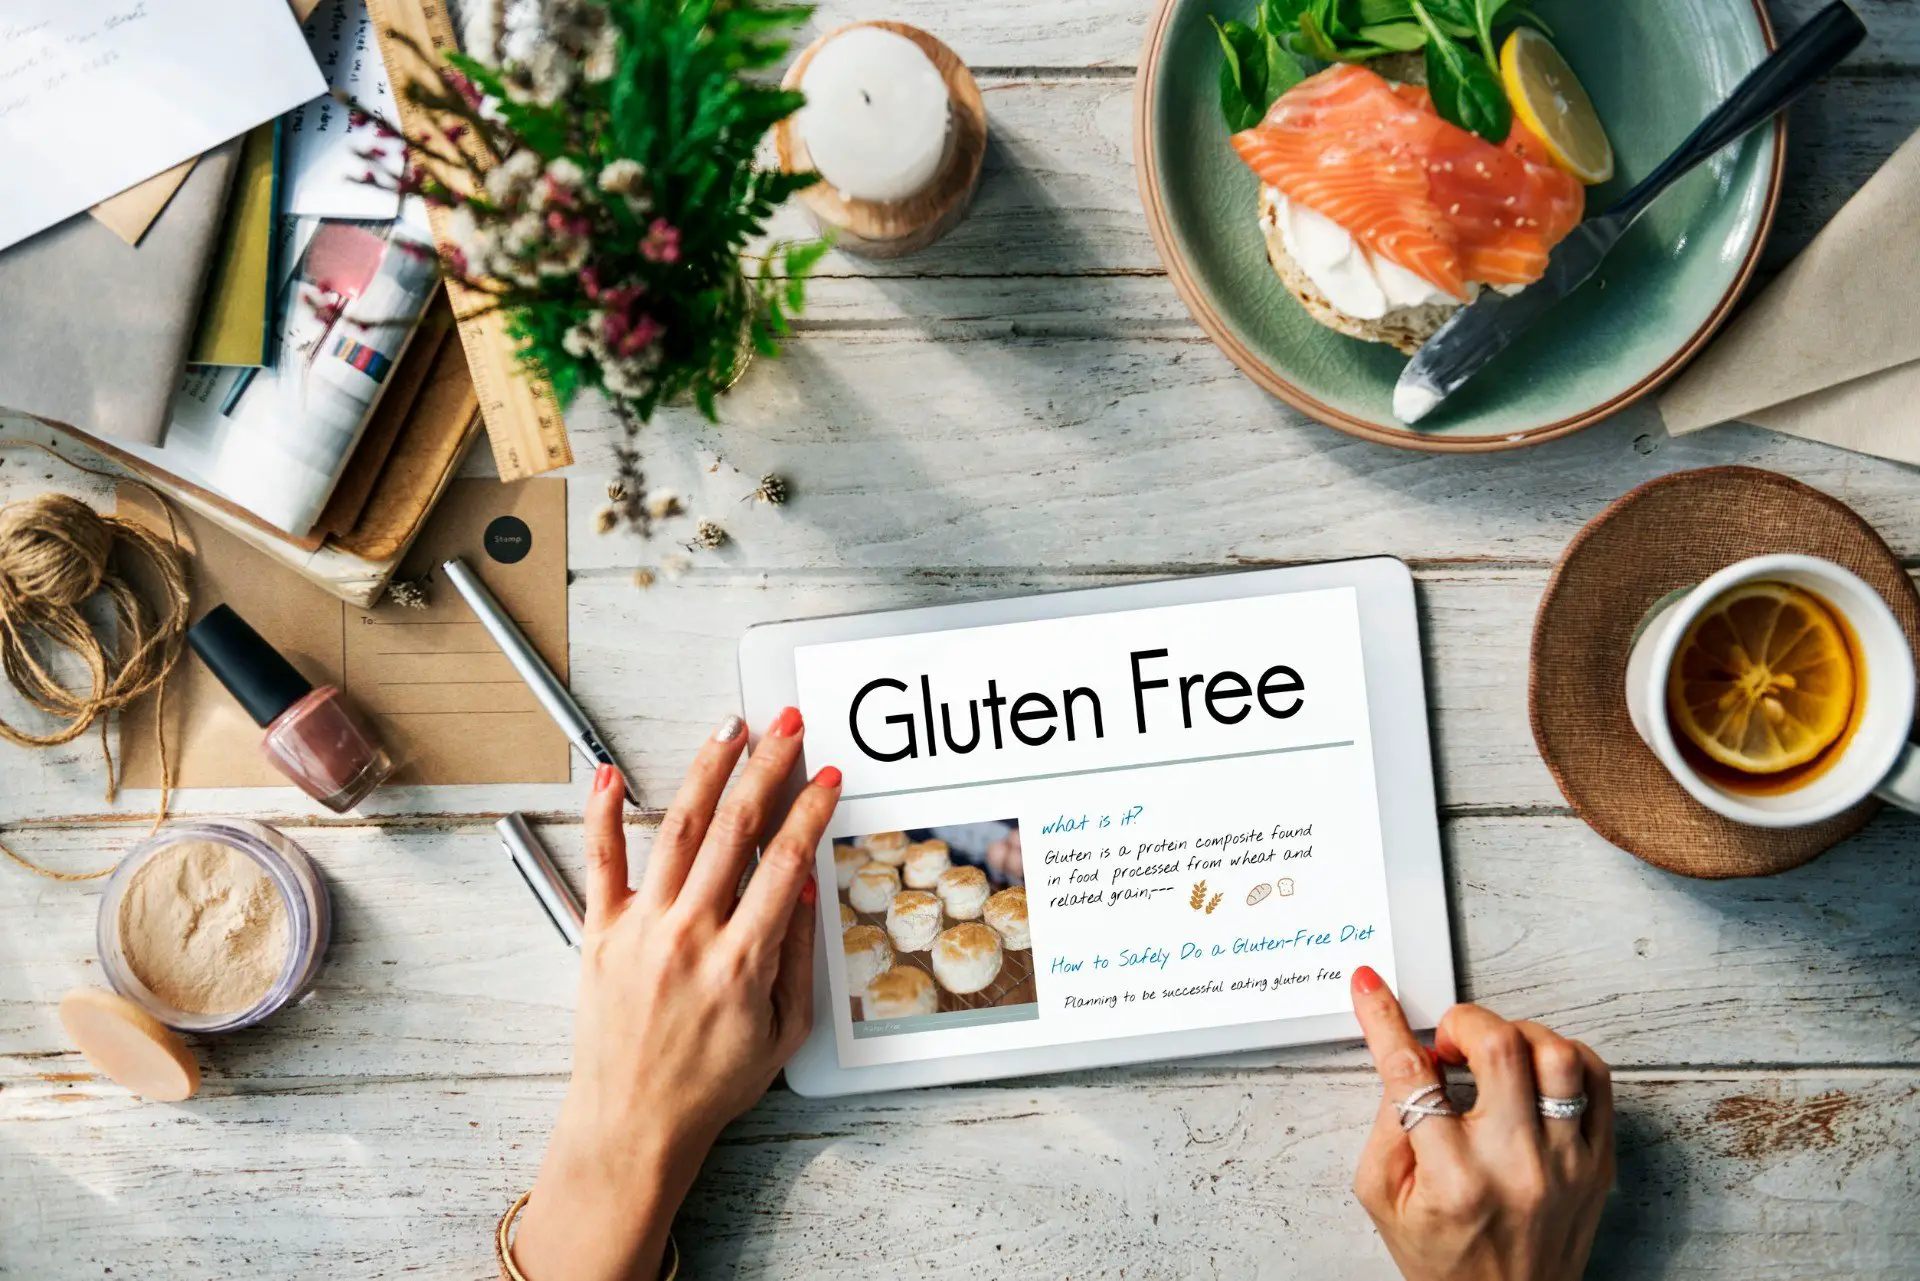 Here Are 7 Signs You May Have Gluten Intolerance